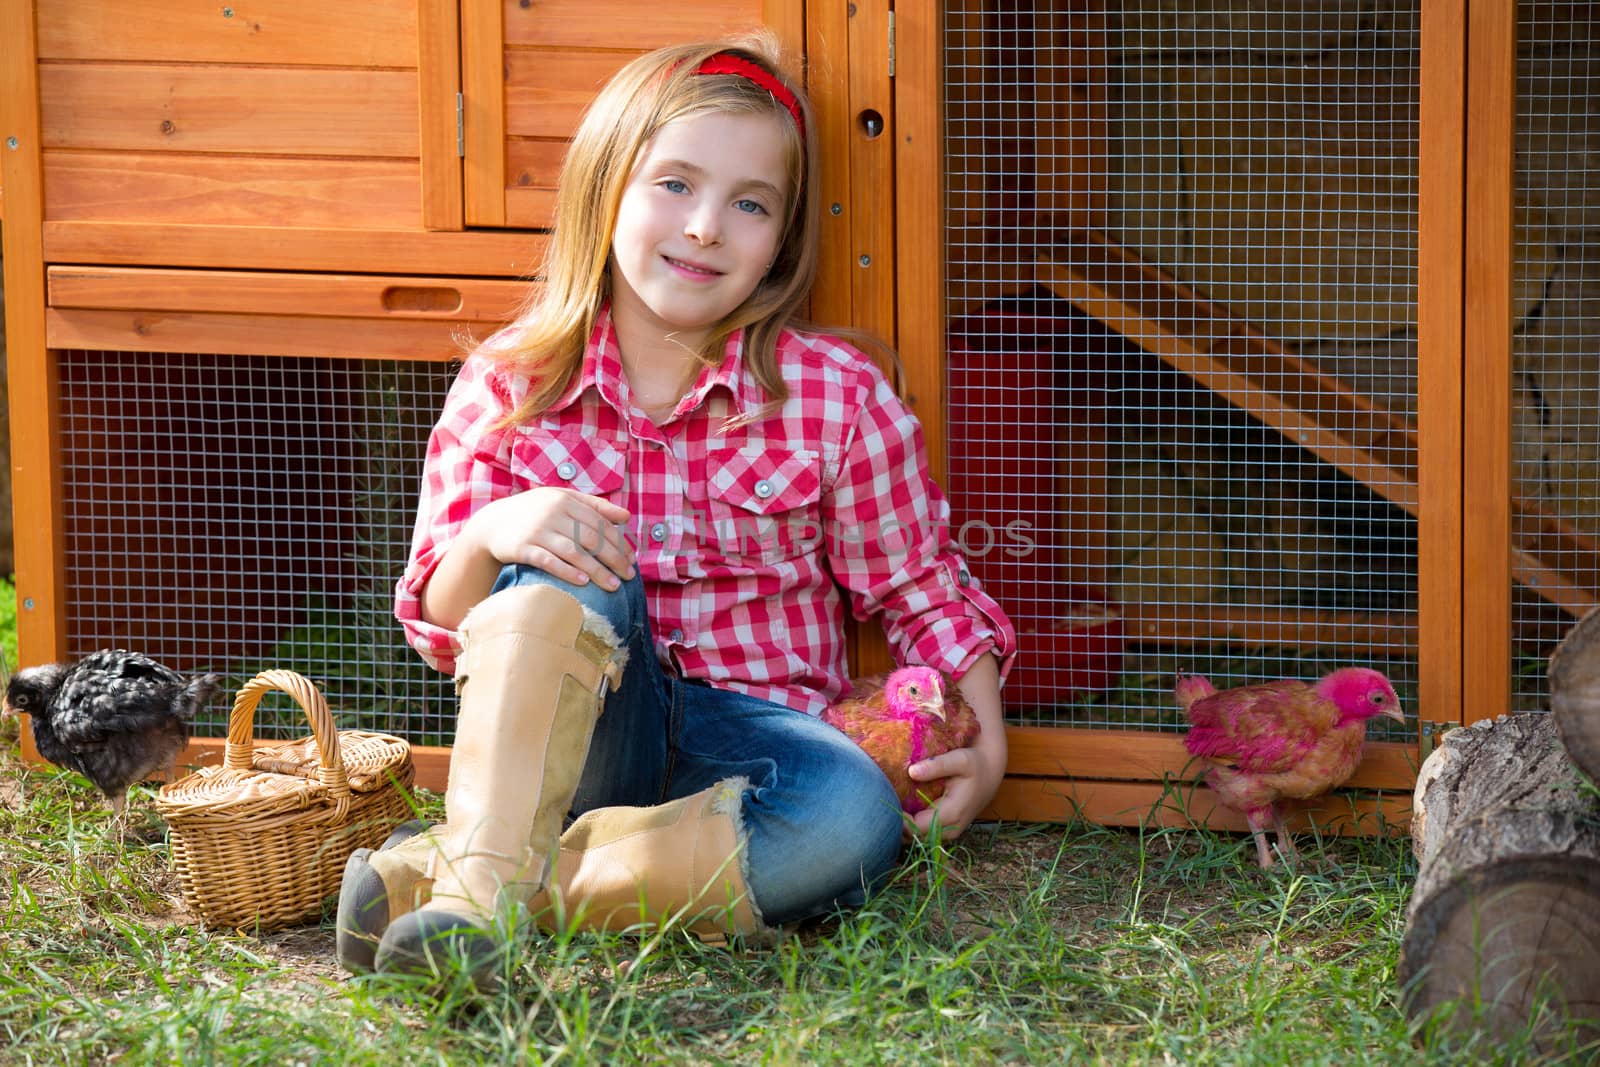 breeder hens kid girl rancher blond farmer playing with chicks in chicken tractor coop